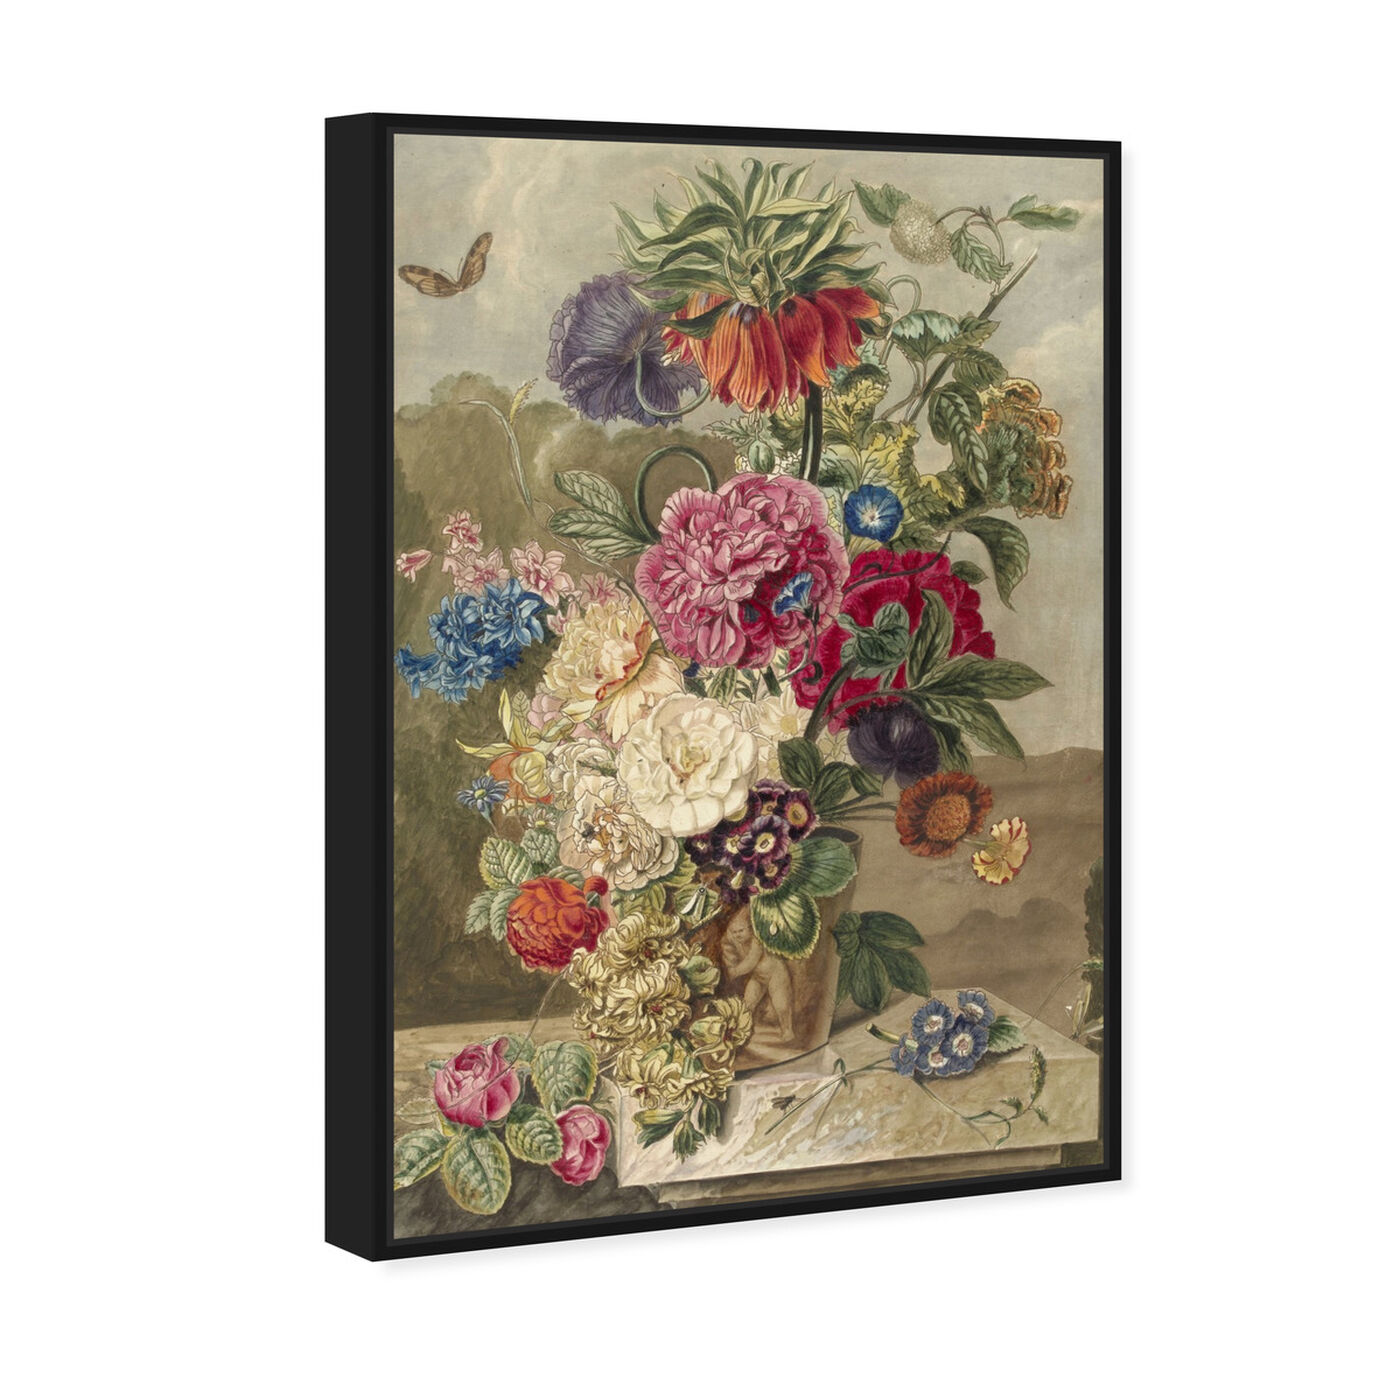 Angled view of Flower Arrangement XIII - The Art Cabinet featuring classic and figurative and french décor art.